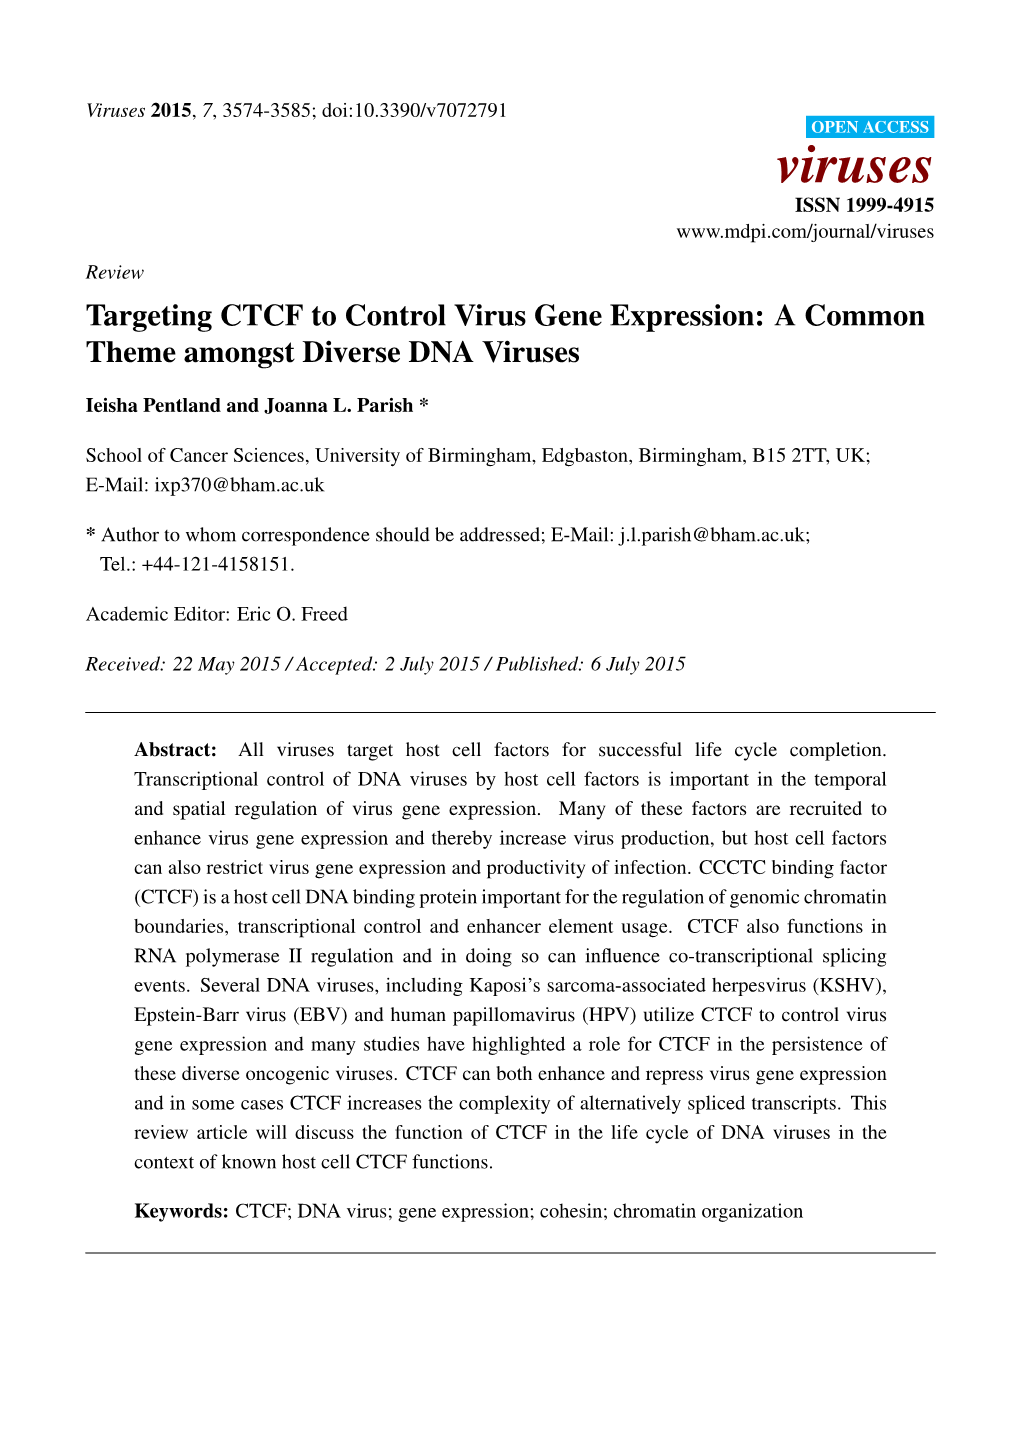 Targeting CTCF to Control Virus Gene Expression: a Common Theme Amongst Diverse DNA Viruses